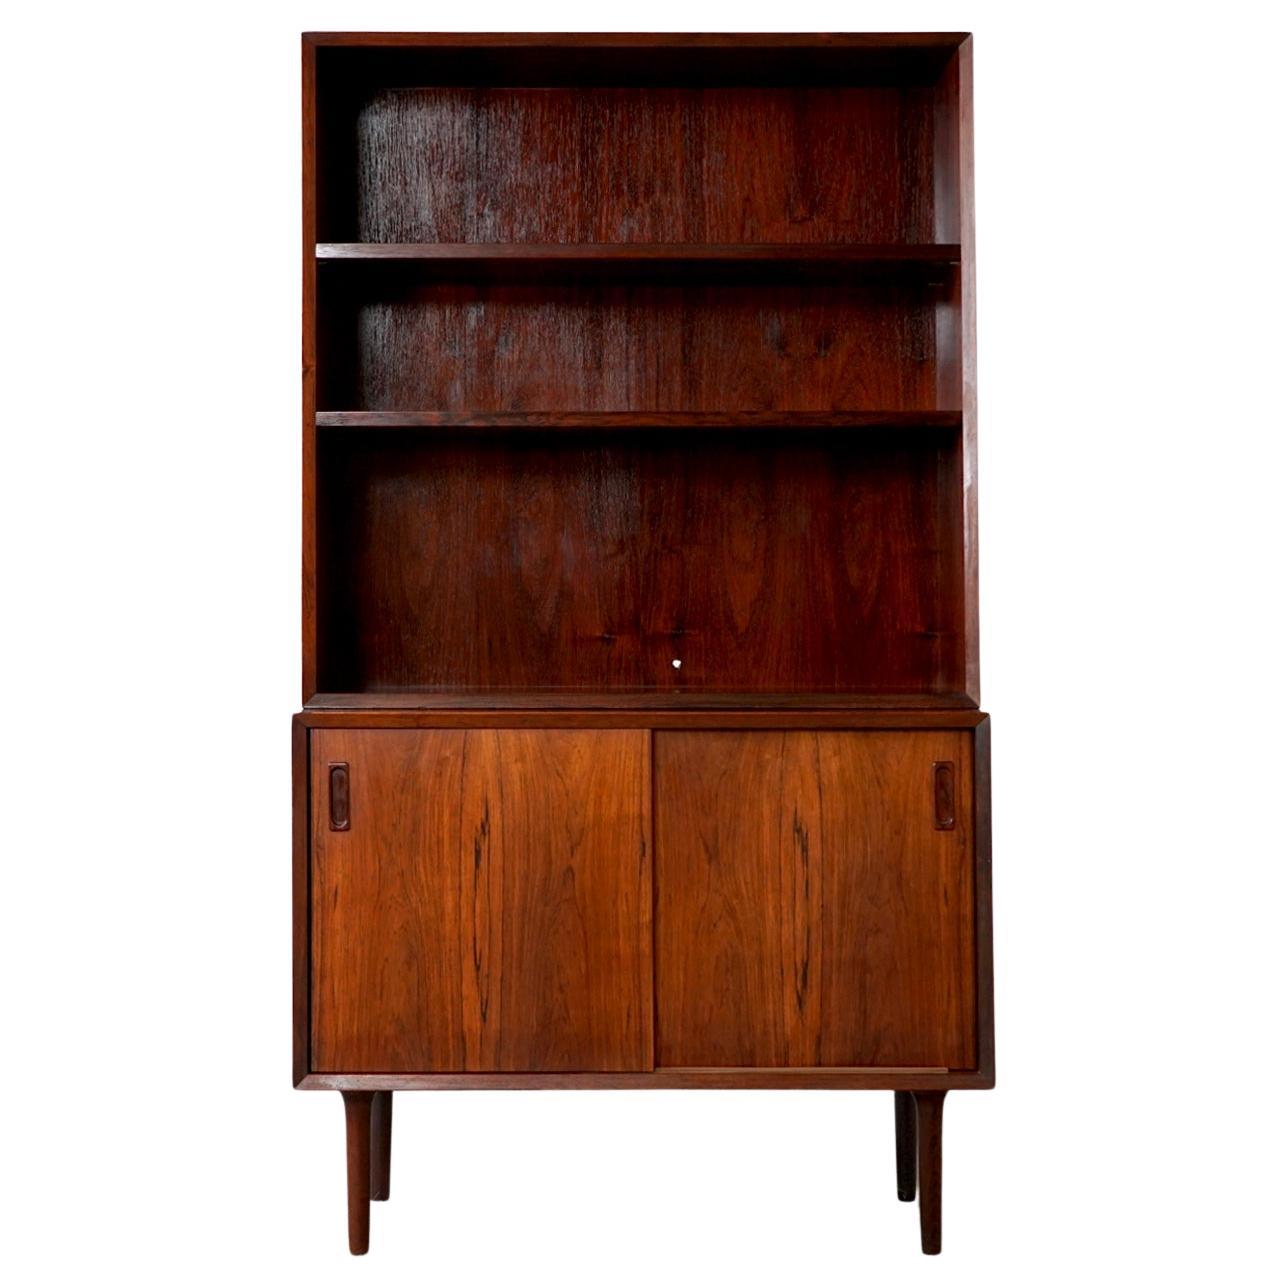 Danish Mid-Century Modern Rosewood Bookcase / Cabinet, by Lyby Mobler